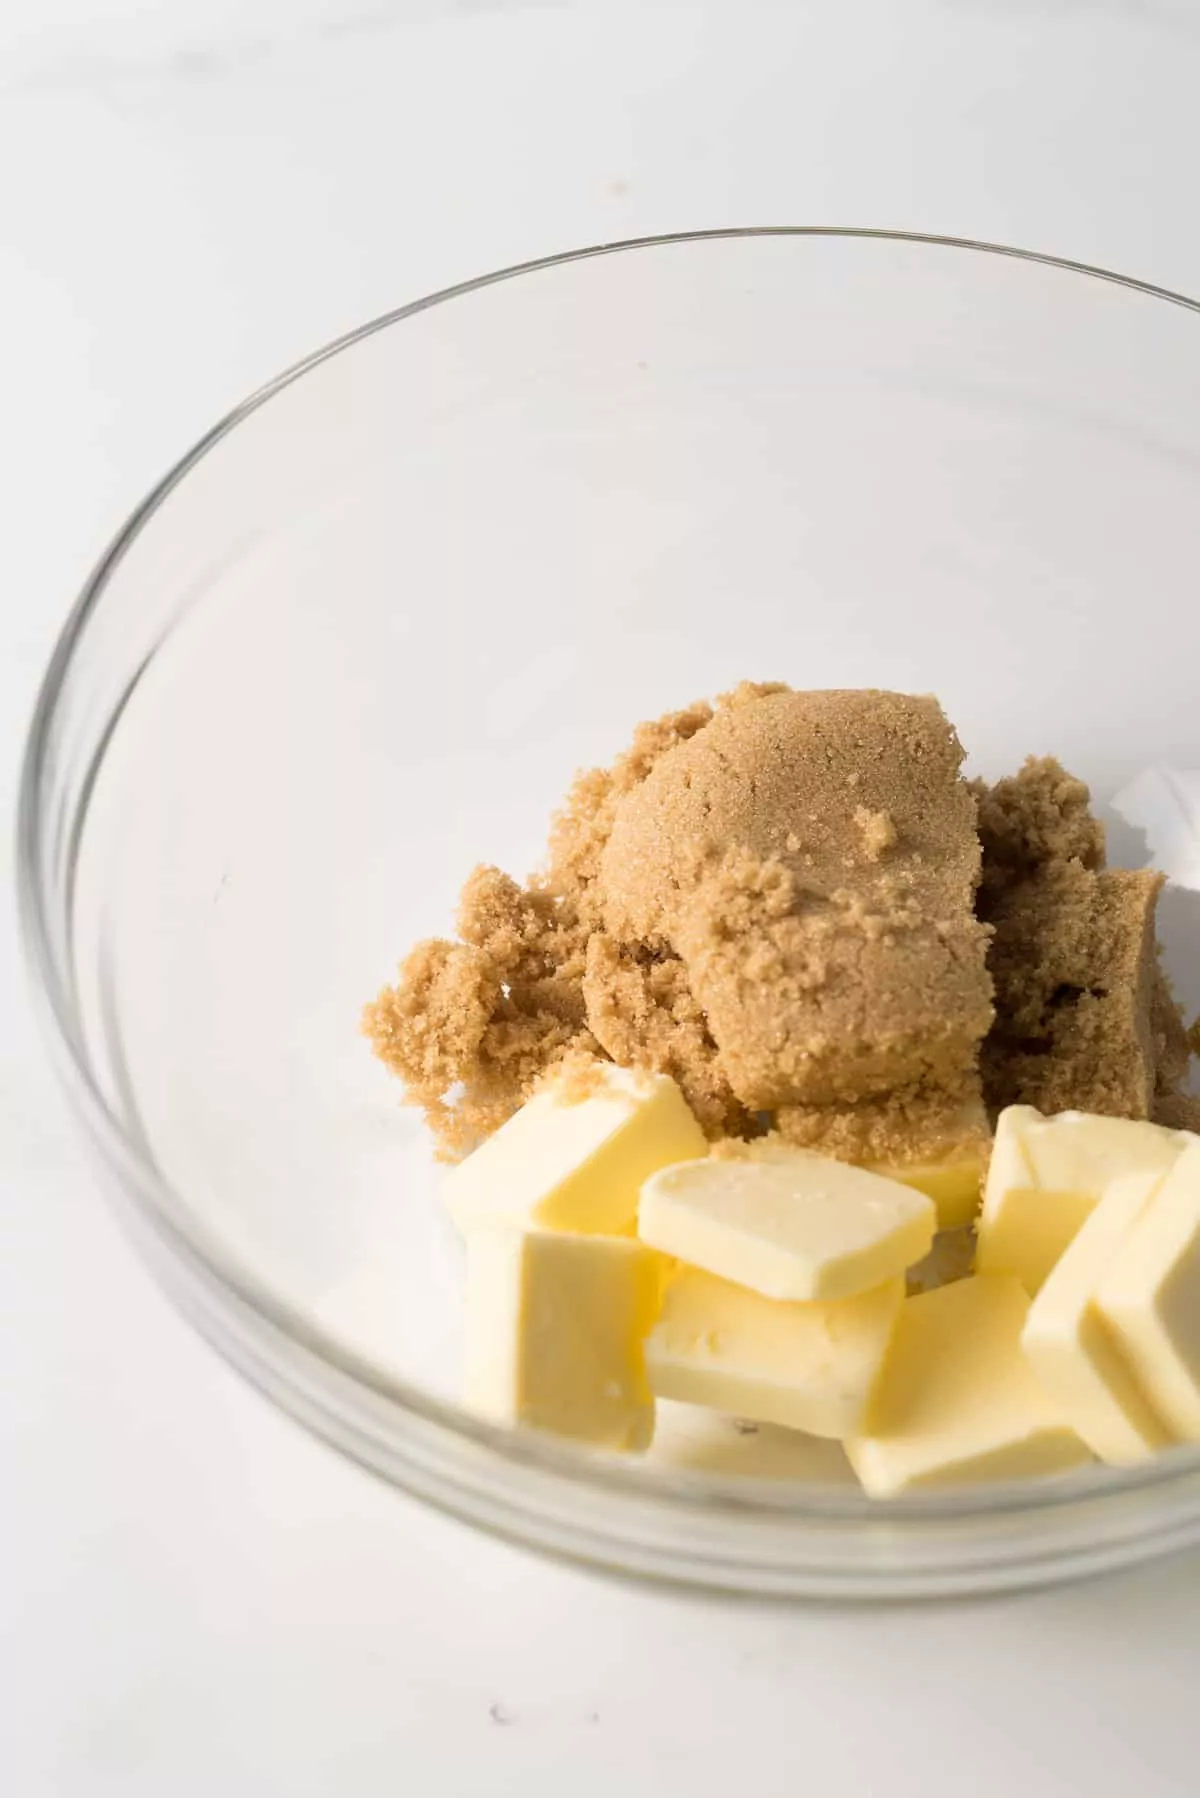 Swerve brown sugar with butter in glass mixing bowl.